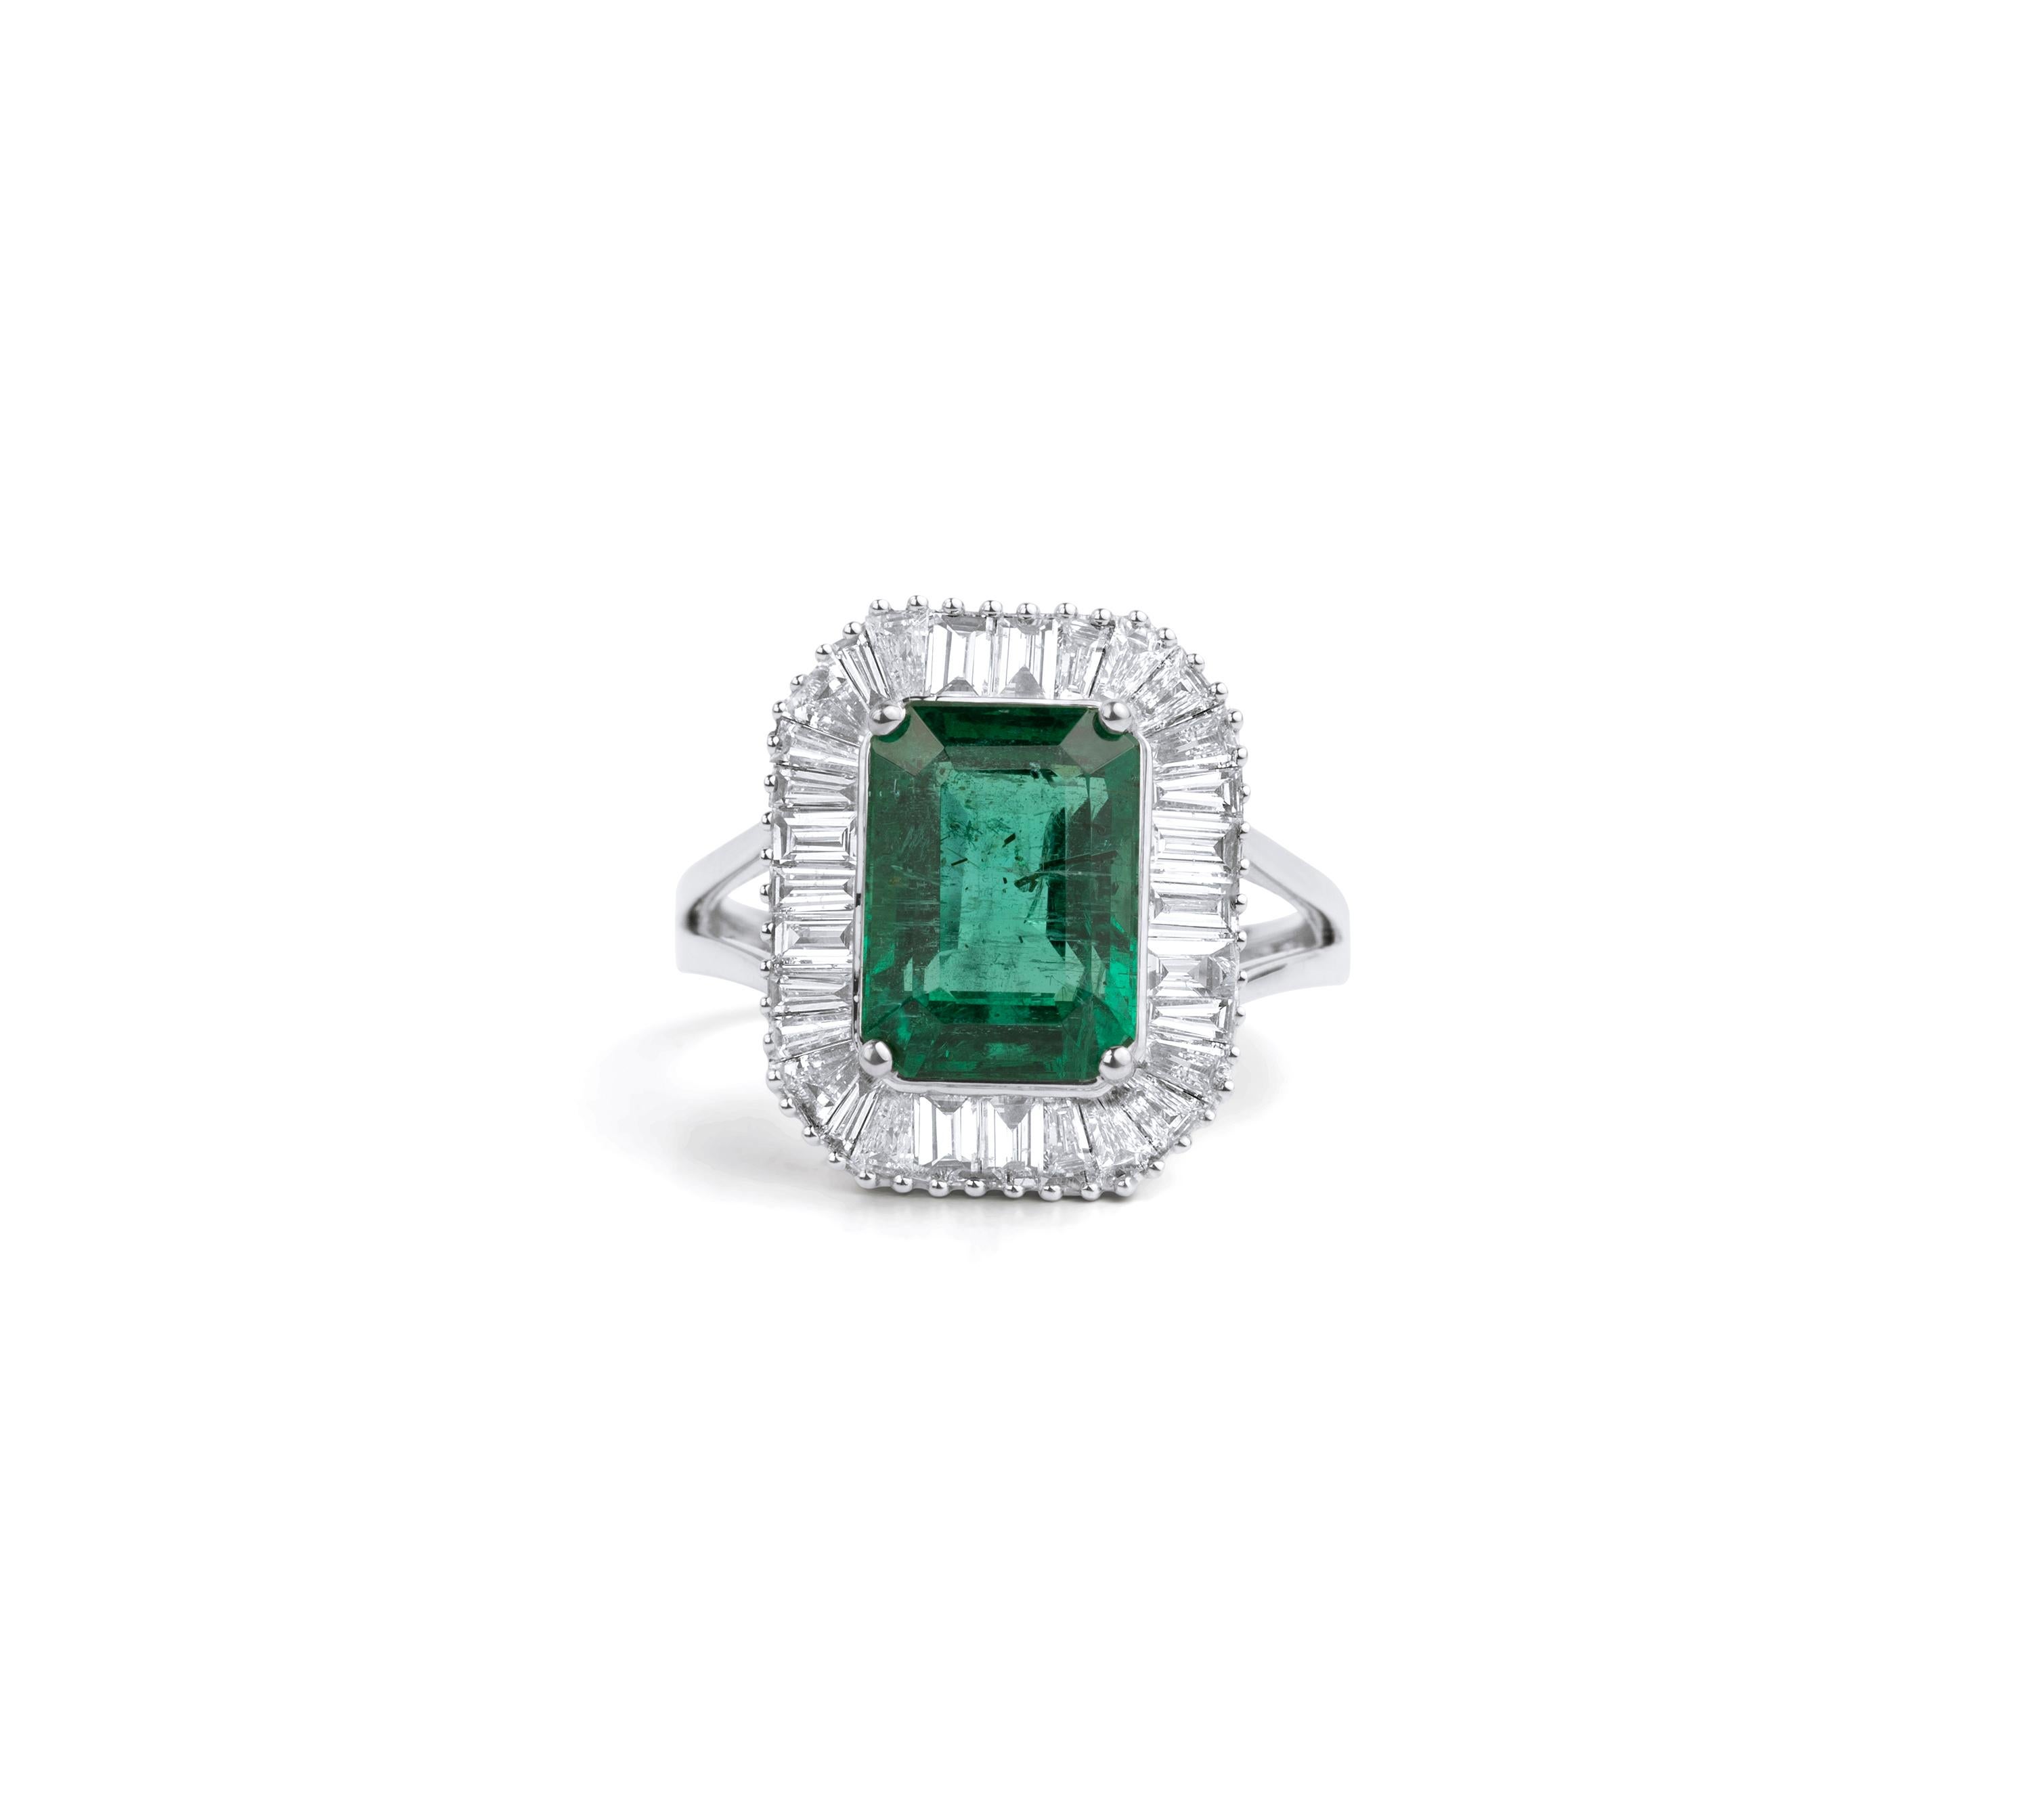 4 Carat Natural Emerald Diamond Cocktail Engagement Ring 18k White Gold In New Condition For Sale In Jaipur, RJ